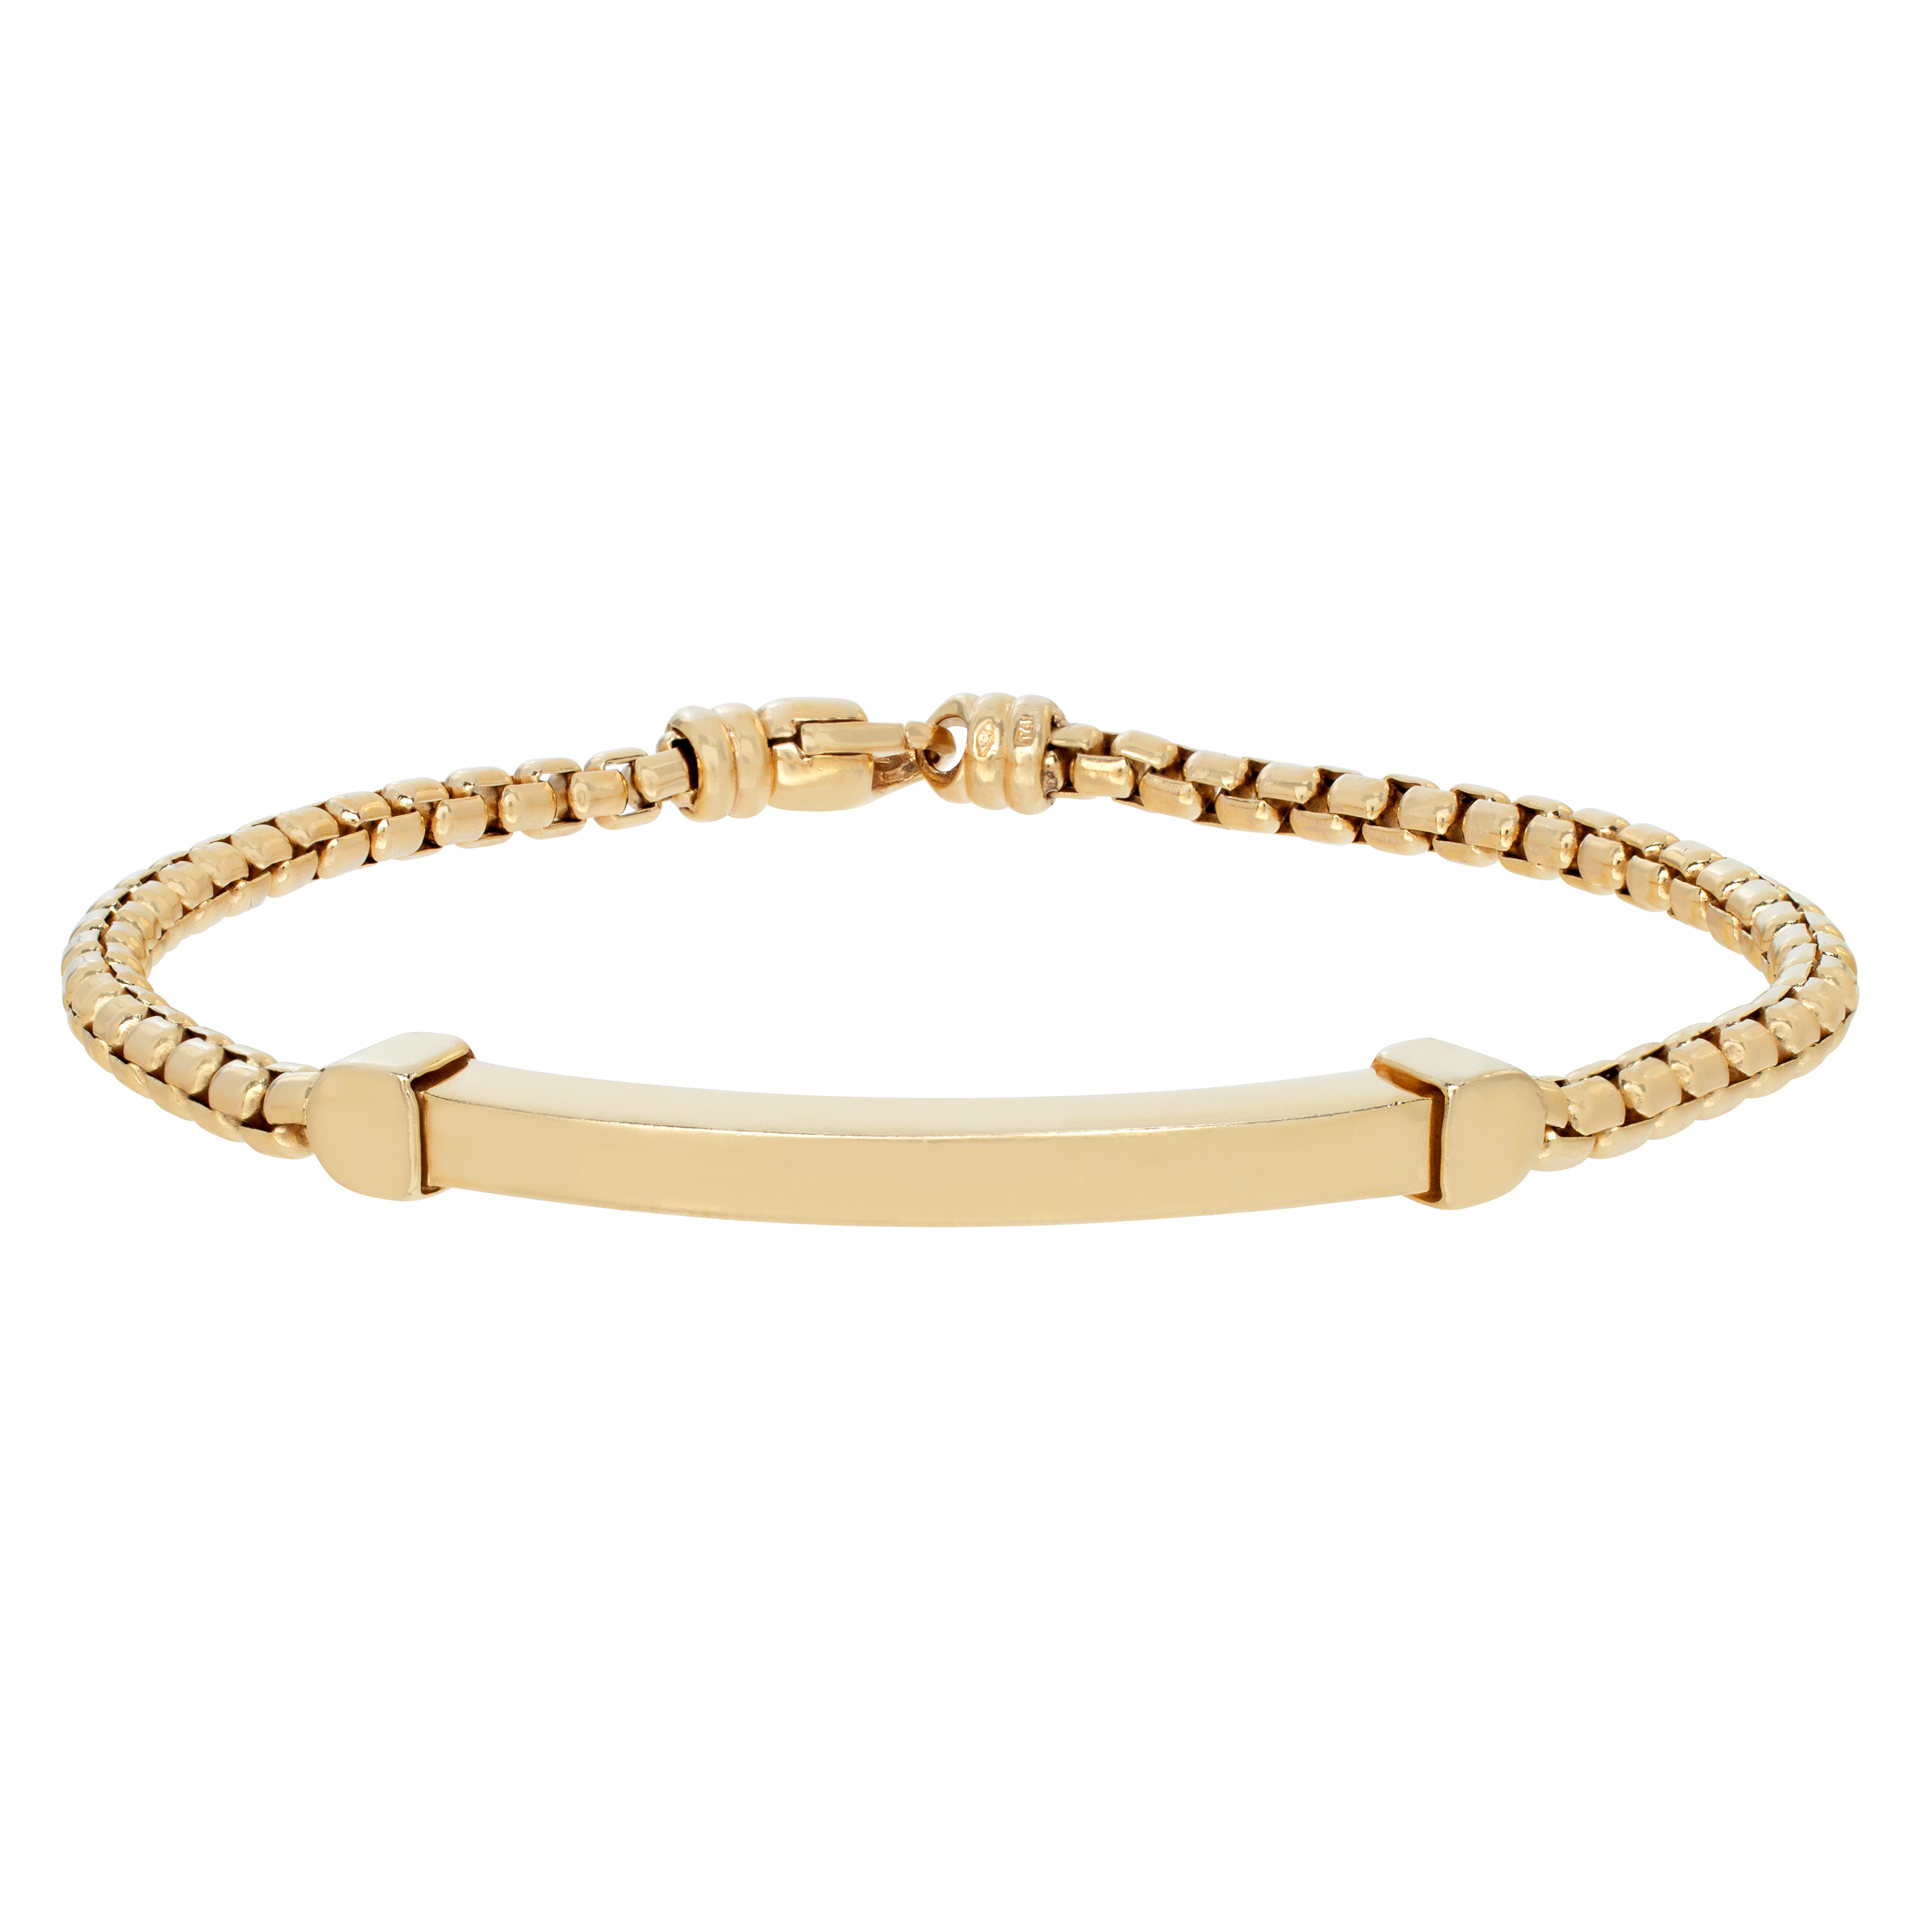 Round rope chain bracelet with 1 inch ID plate in 14k yellow gold